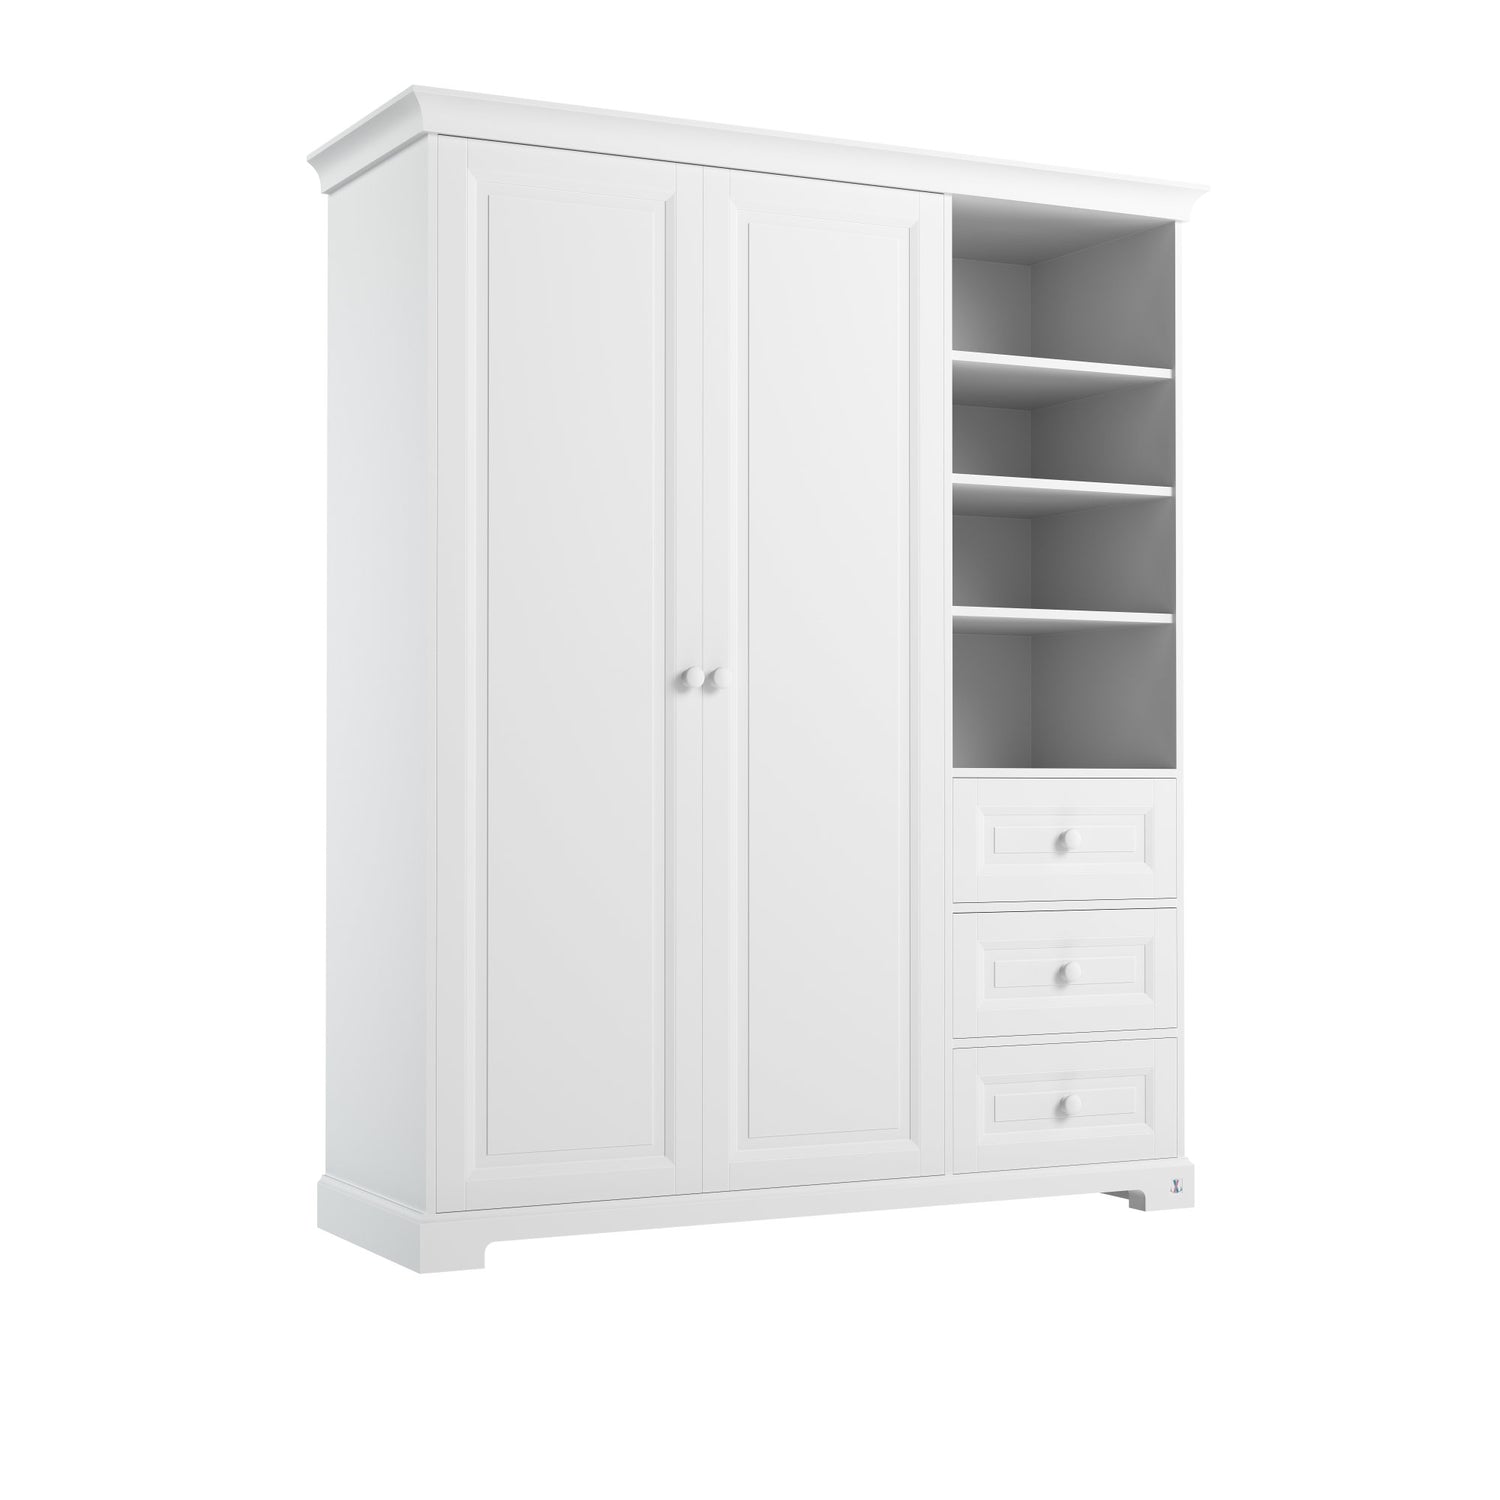 Wardrobe ROYAL with 2 doors and case with 3 drawers | Classic wardrobe for children rooms | Big wardrobe with 2 doors | Exclusive baby furniture | Exlusive children furniture